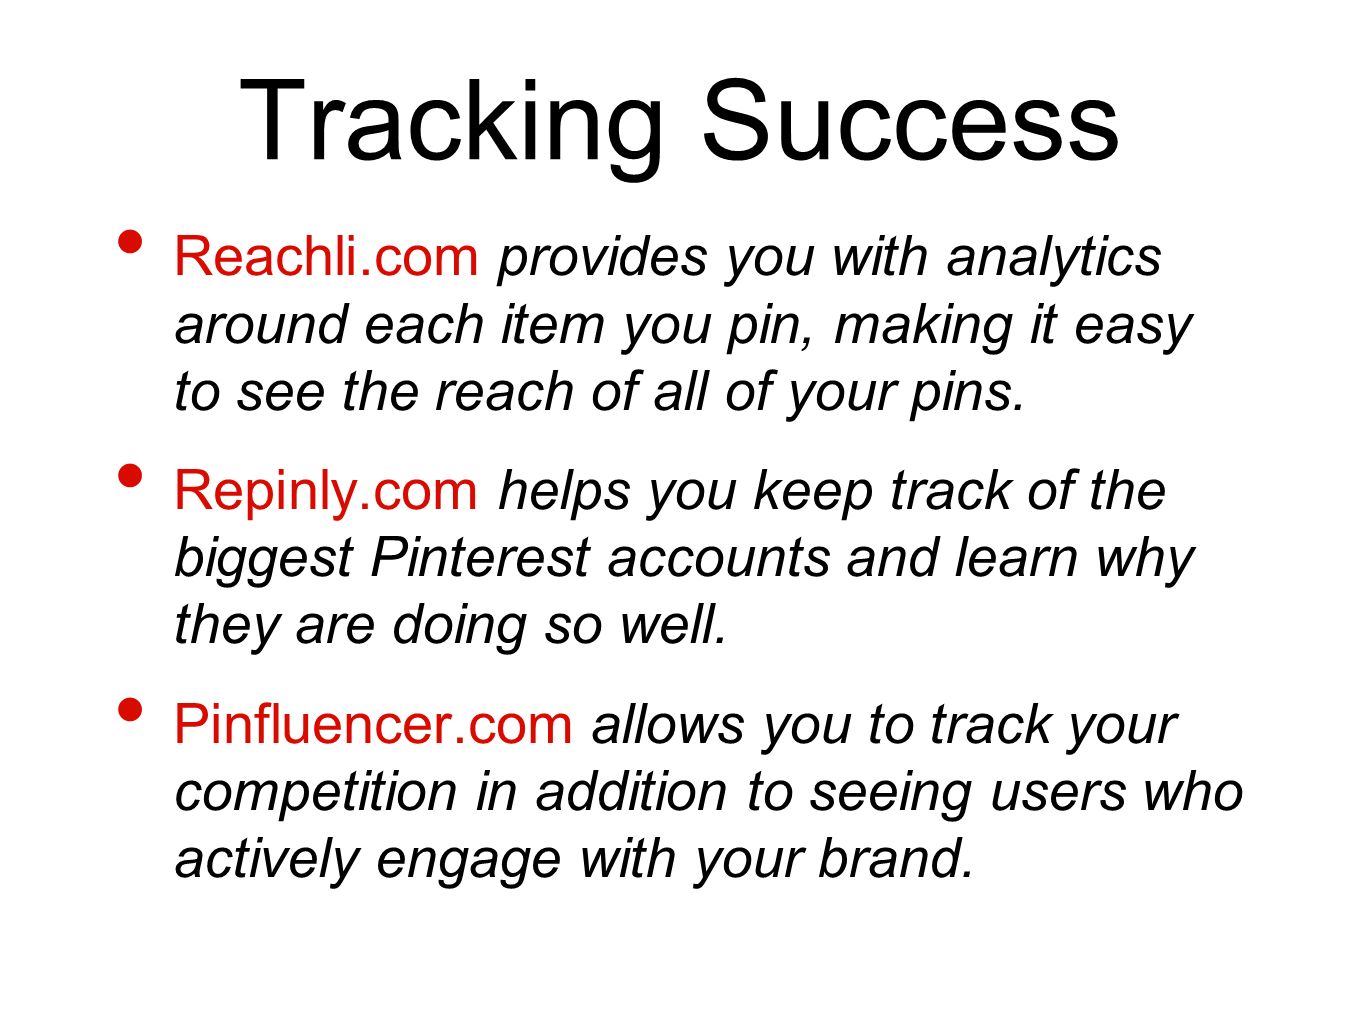 Tracking Success Reachli.com provides you with analytics around each item you pin, making it easy to see the reach of all of your pins.